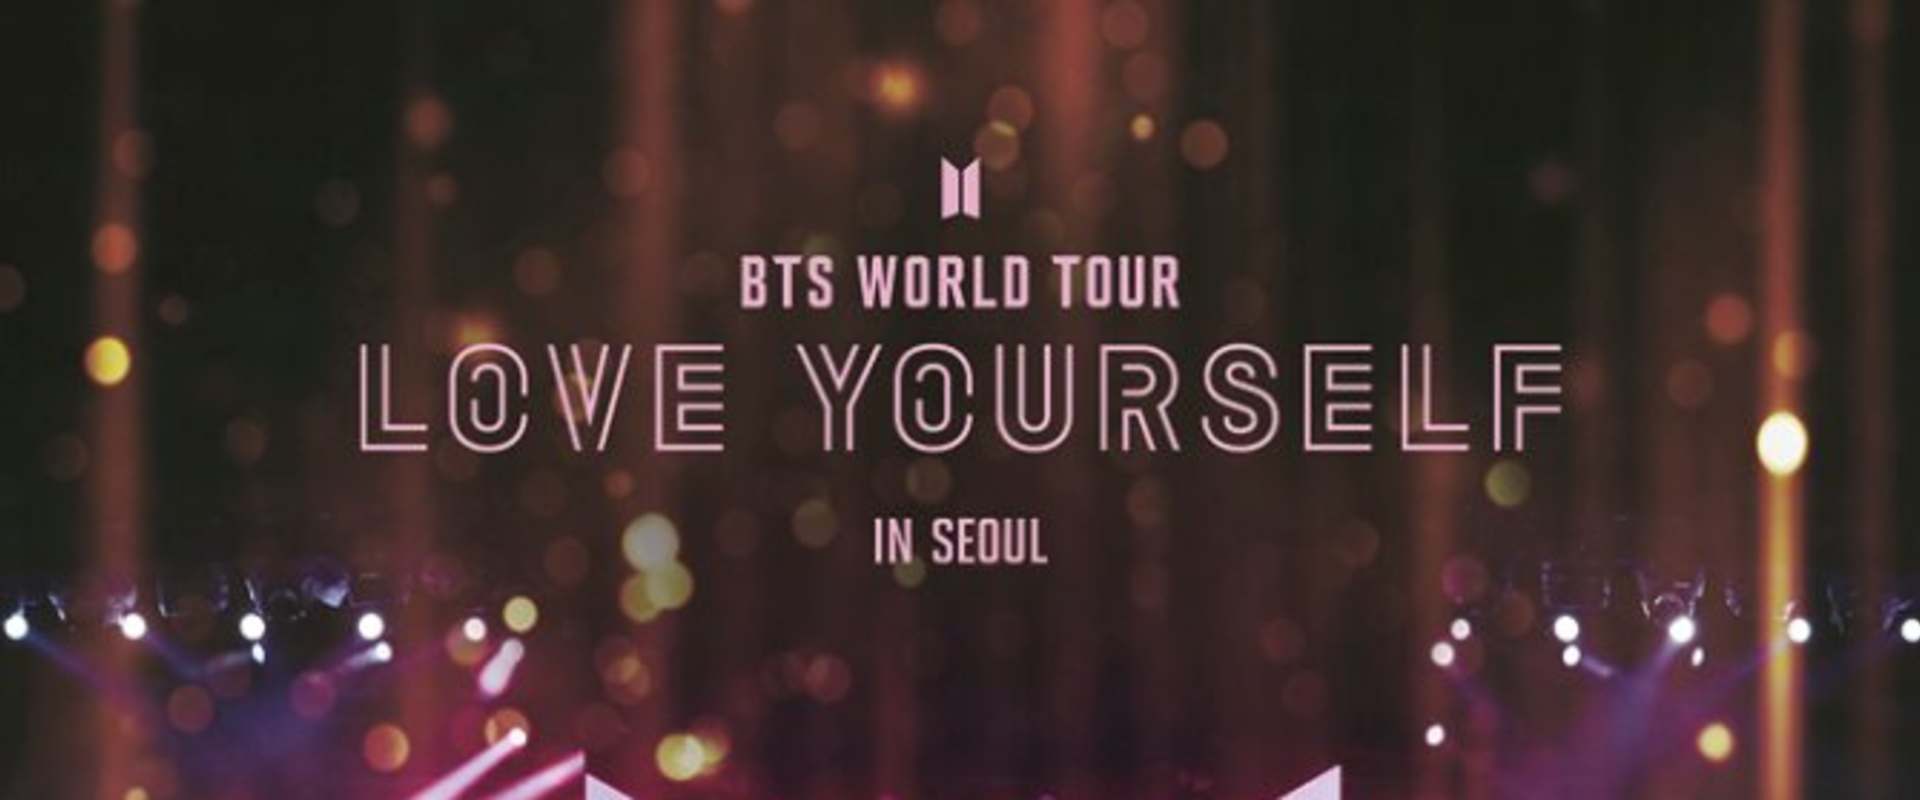 BTS World Tour: Love Yourself in Seoul background 2